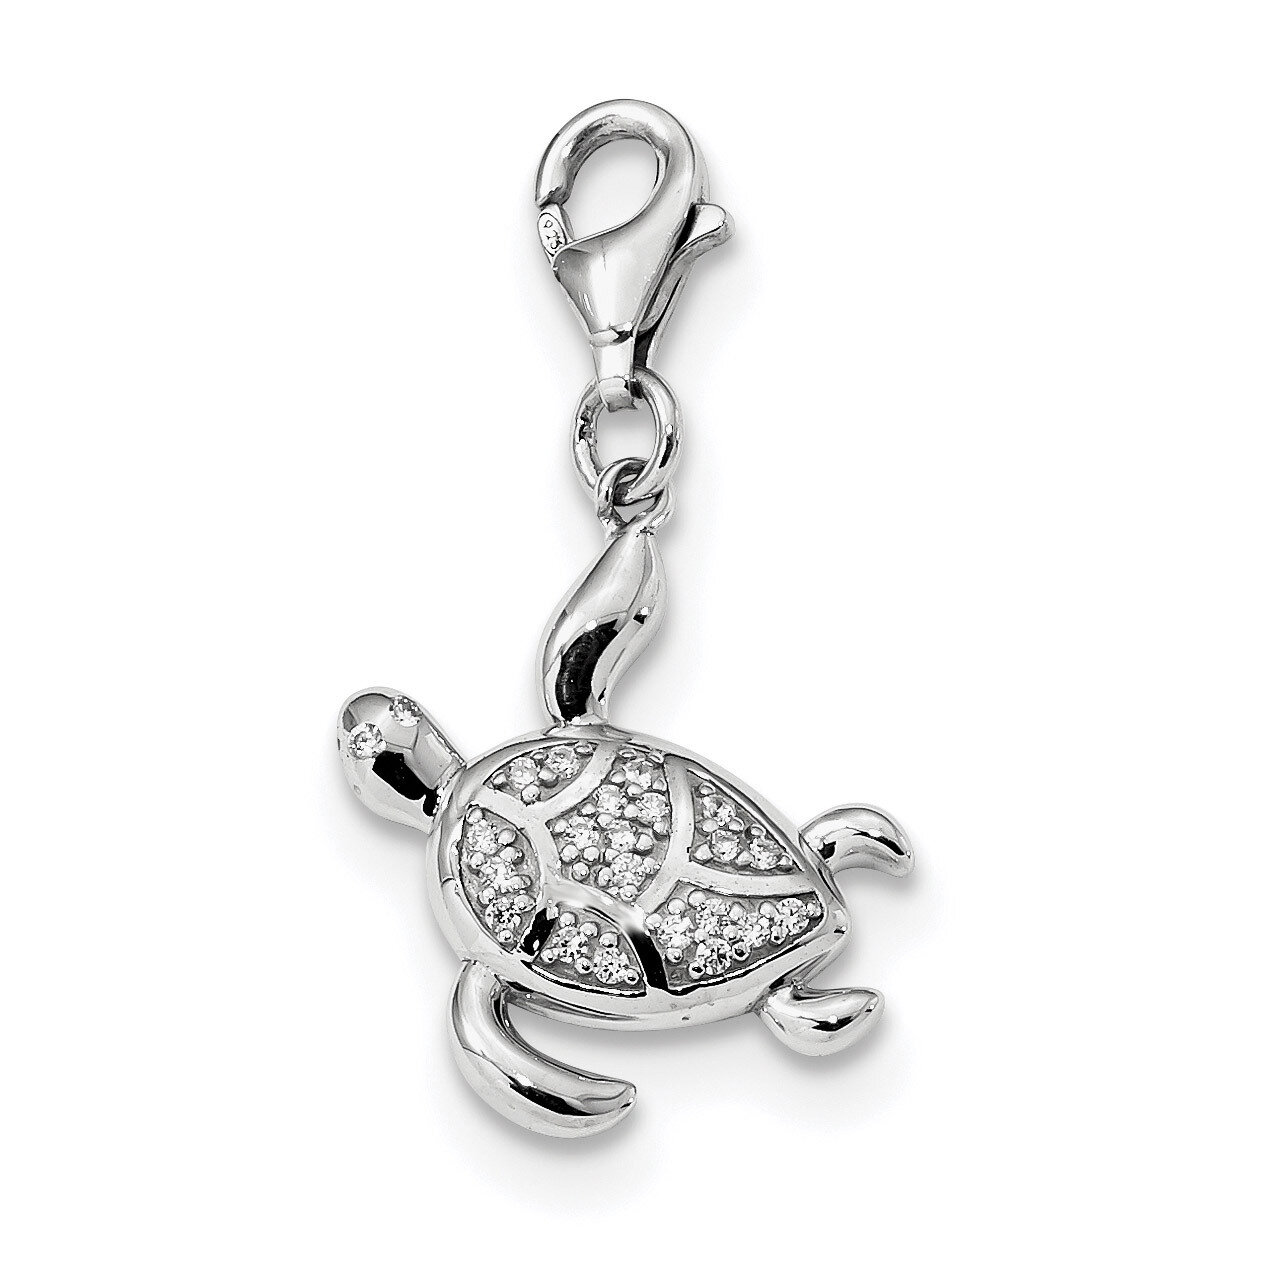 CZ Diamond Sea Turtle with Lobster Clasp Charm Sterling Silver Rhodium-plated QC9281